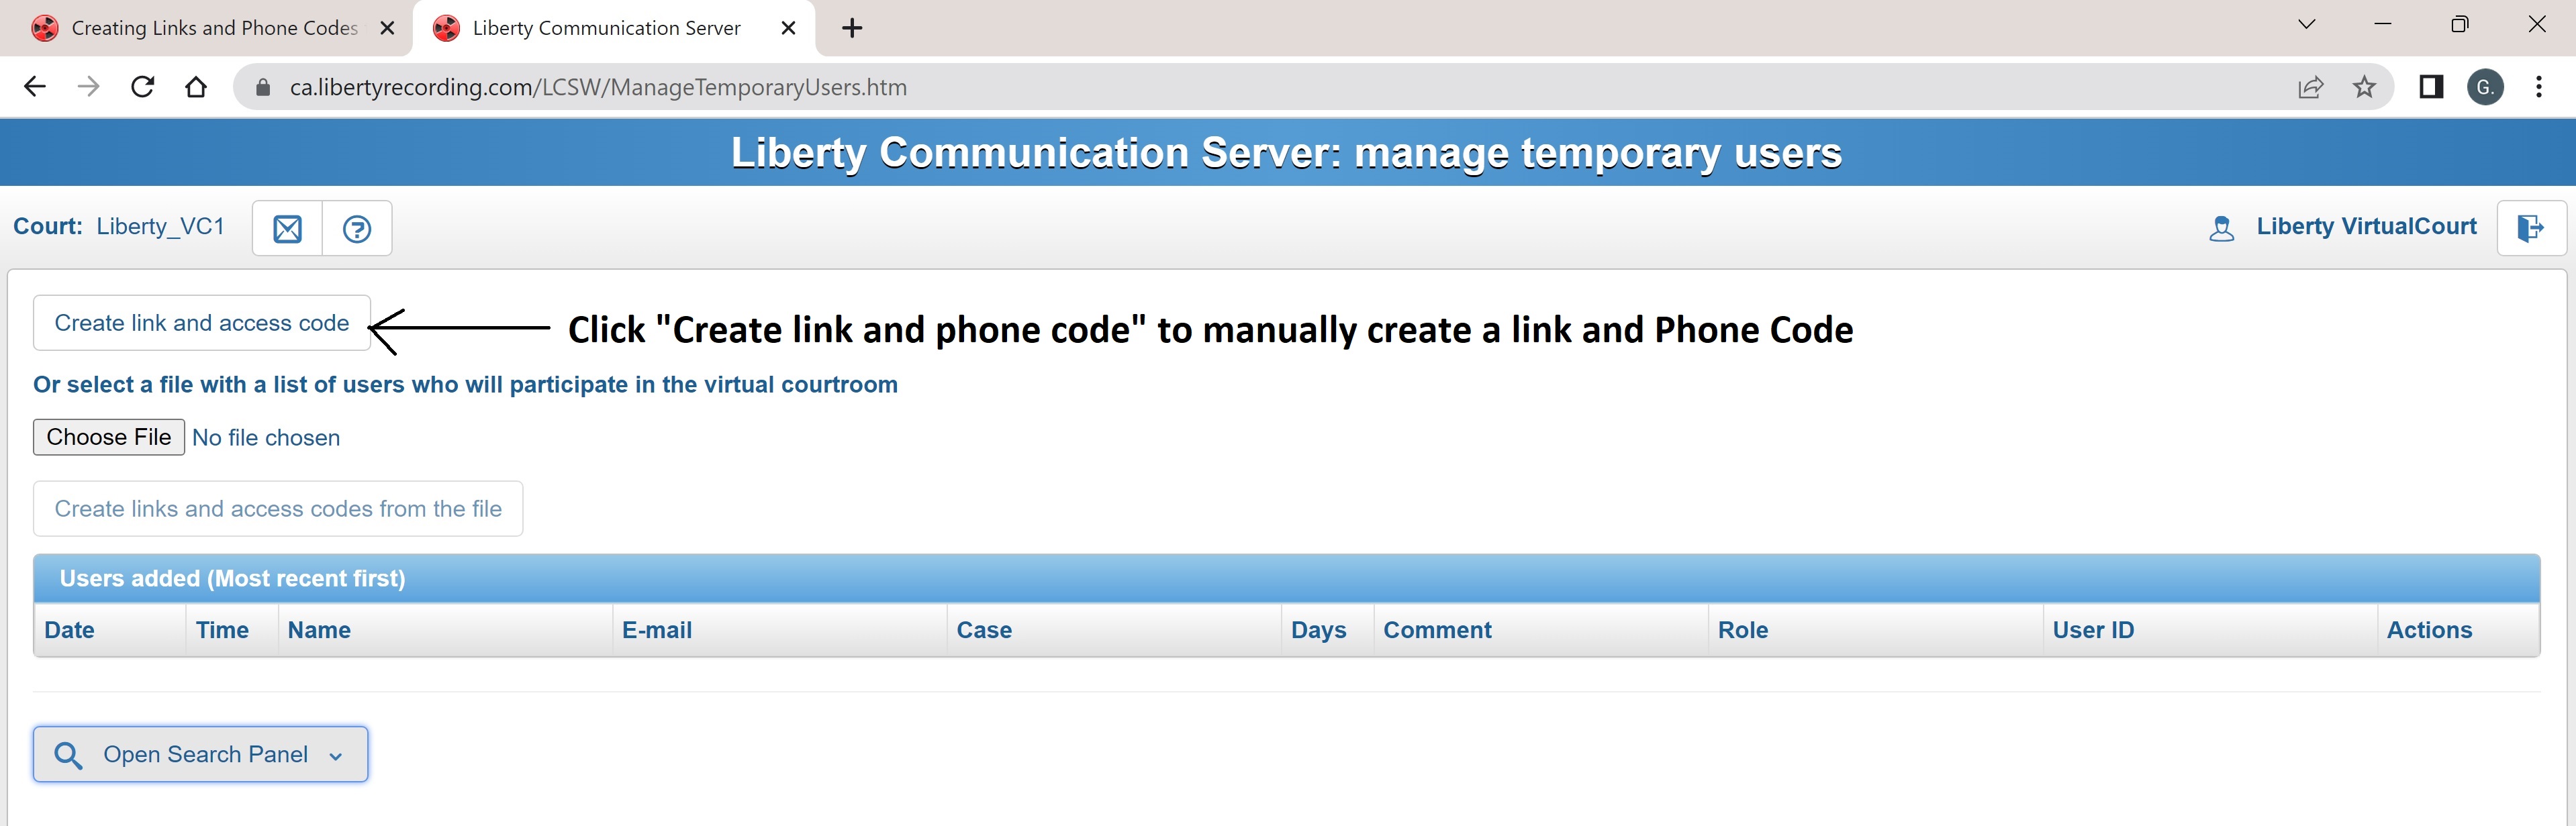 Button to Manually Create link and Phone Code